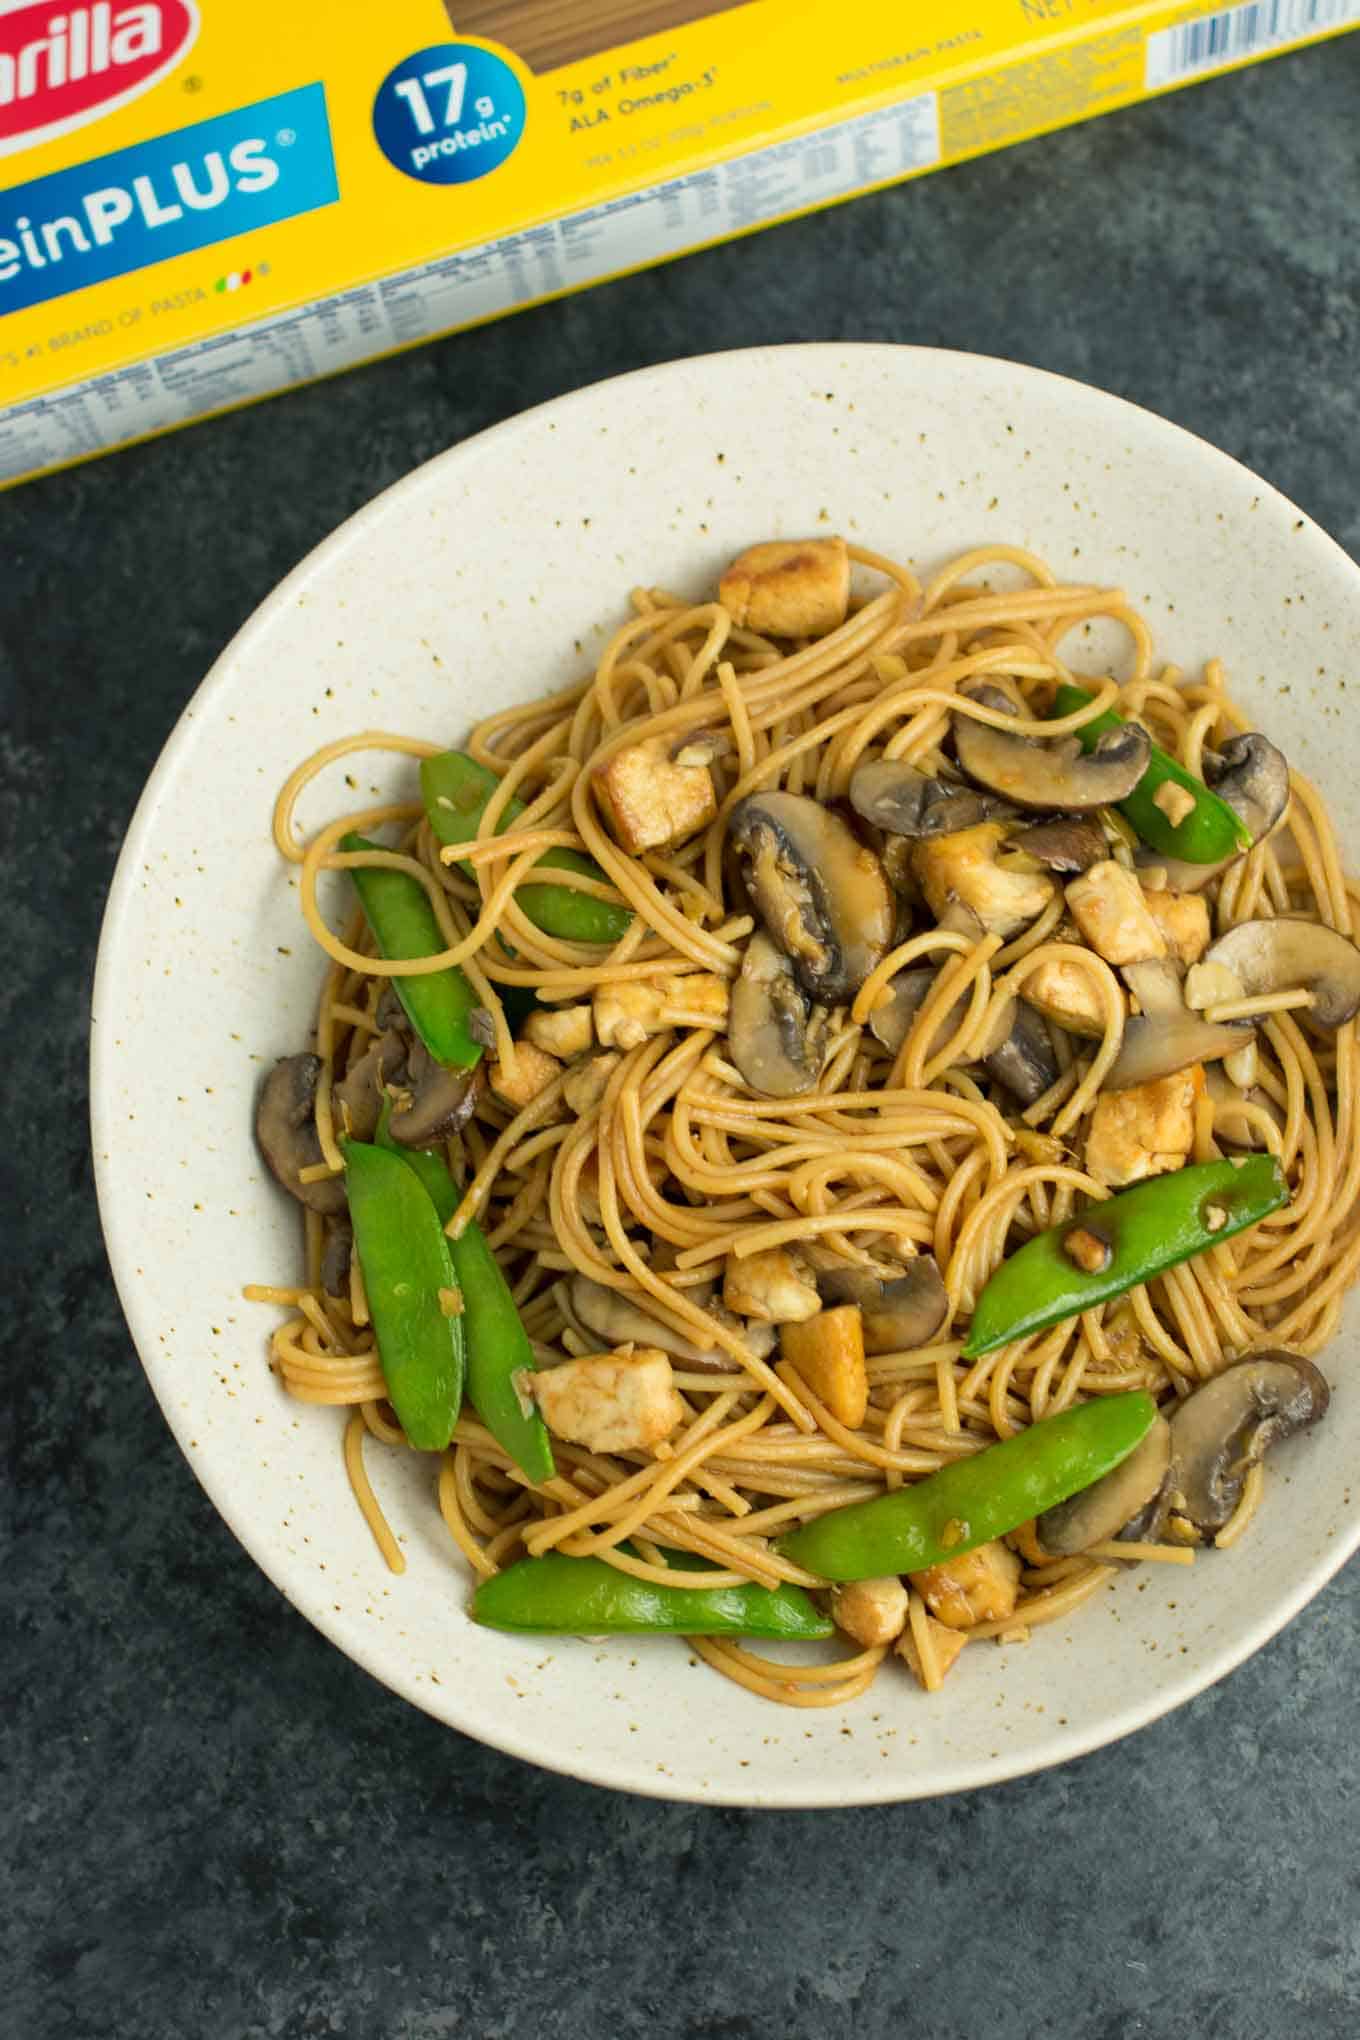 Easy Tofu Lo Mein recipe with fresh vegetables and a simple sauce. Ready in minutes and packed full of protein! #tofu #lomein #vegan #vegetarian